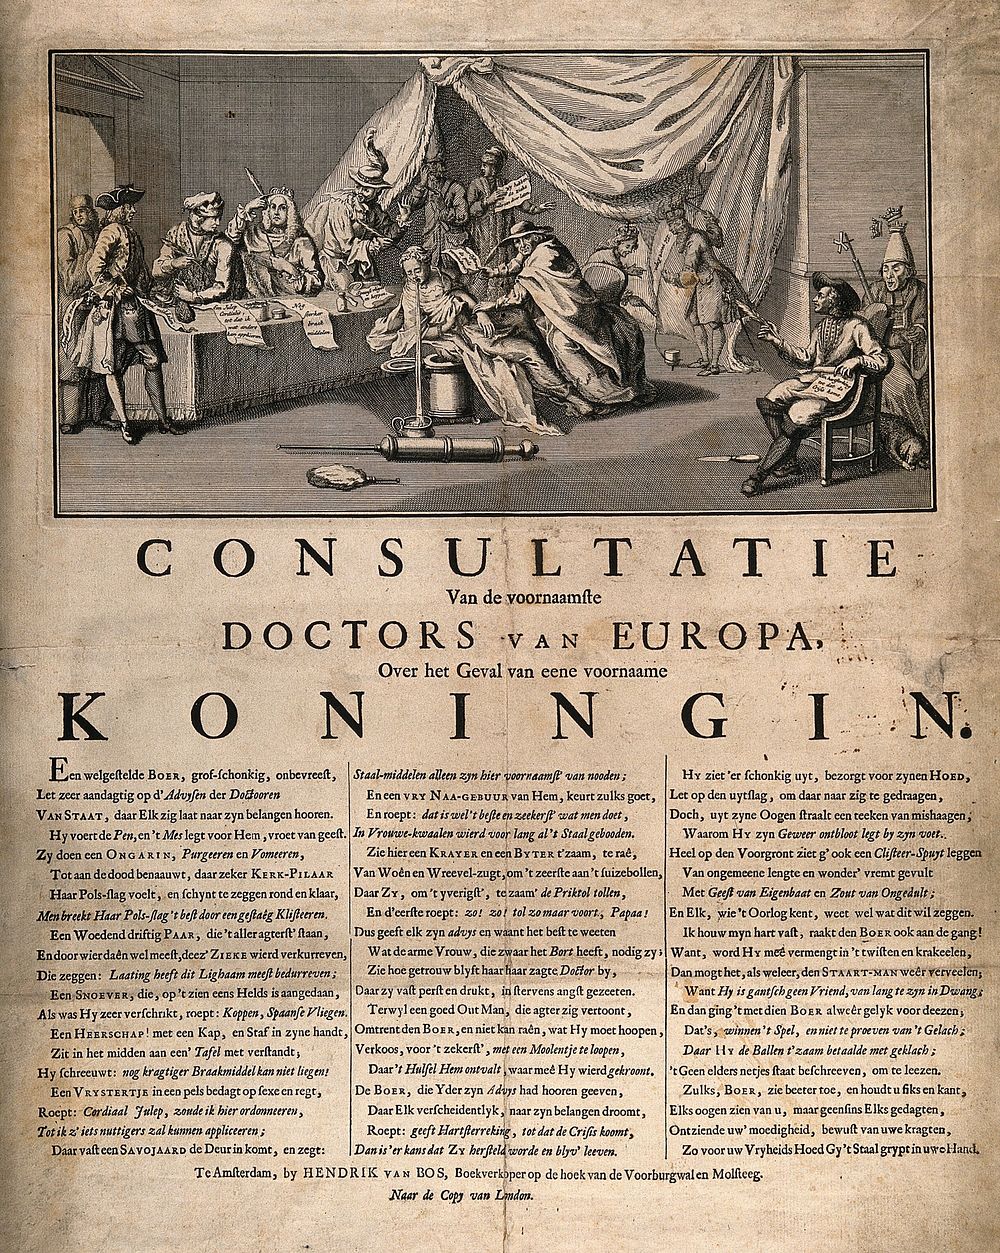 The rulers of Europe as doctors prescribing remedies for Empress Maria Theresa. Etching and letterpress, 1742.